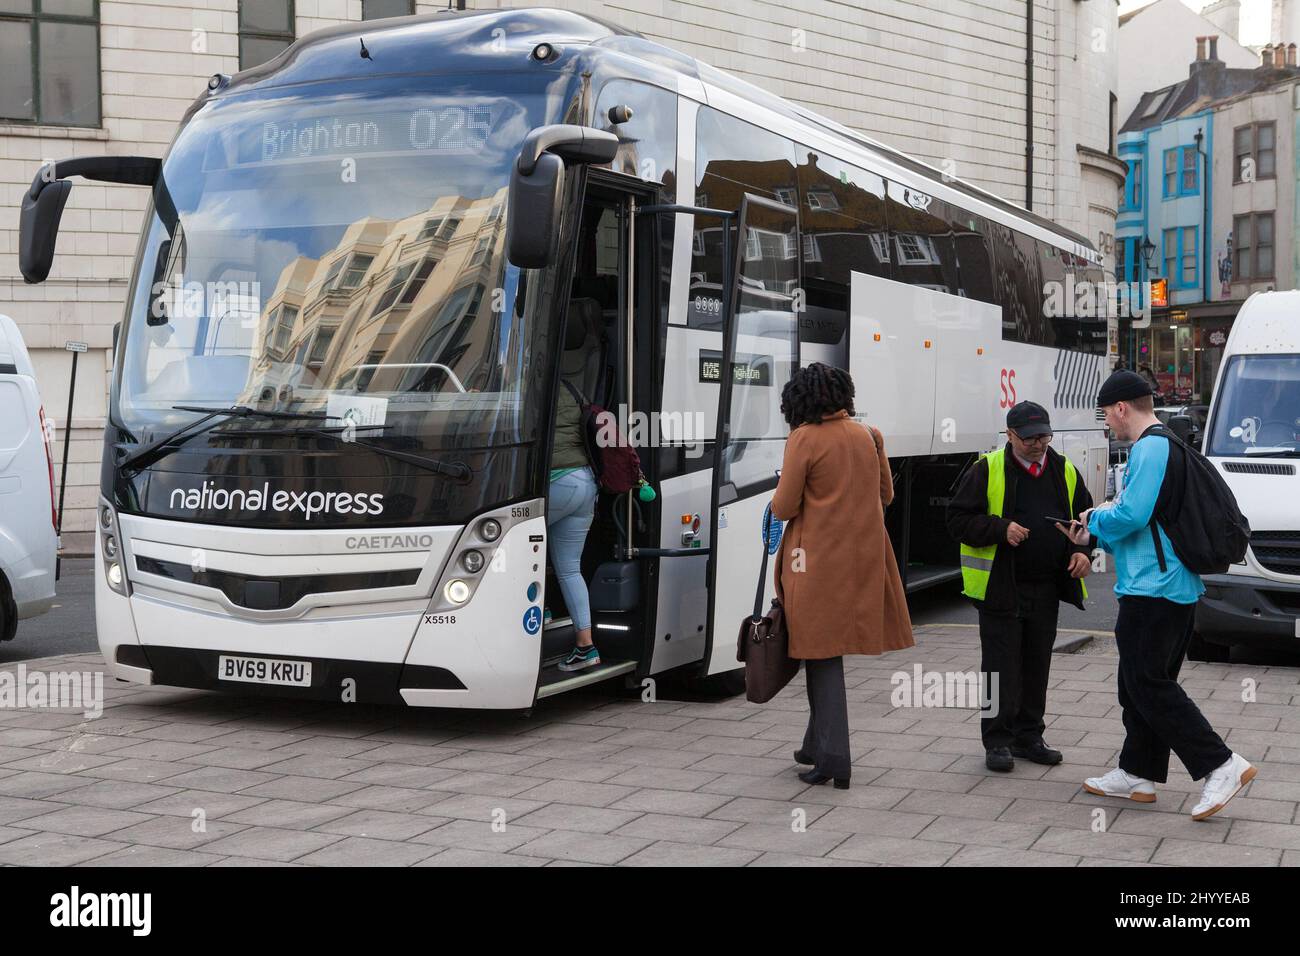 Passengers get their tickets checked before boarding a National Express coach in Brighton Stock Photo